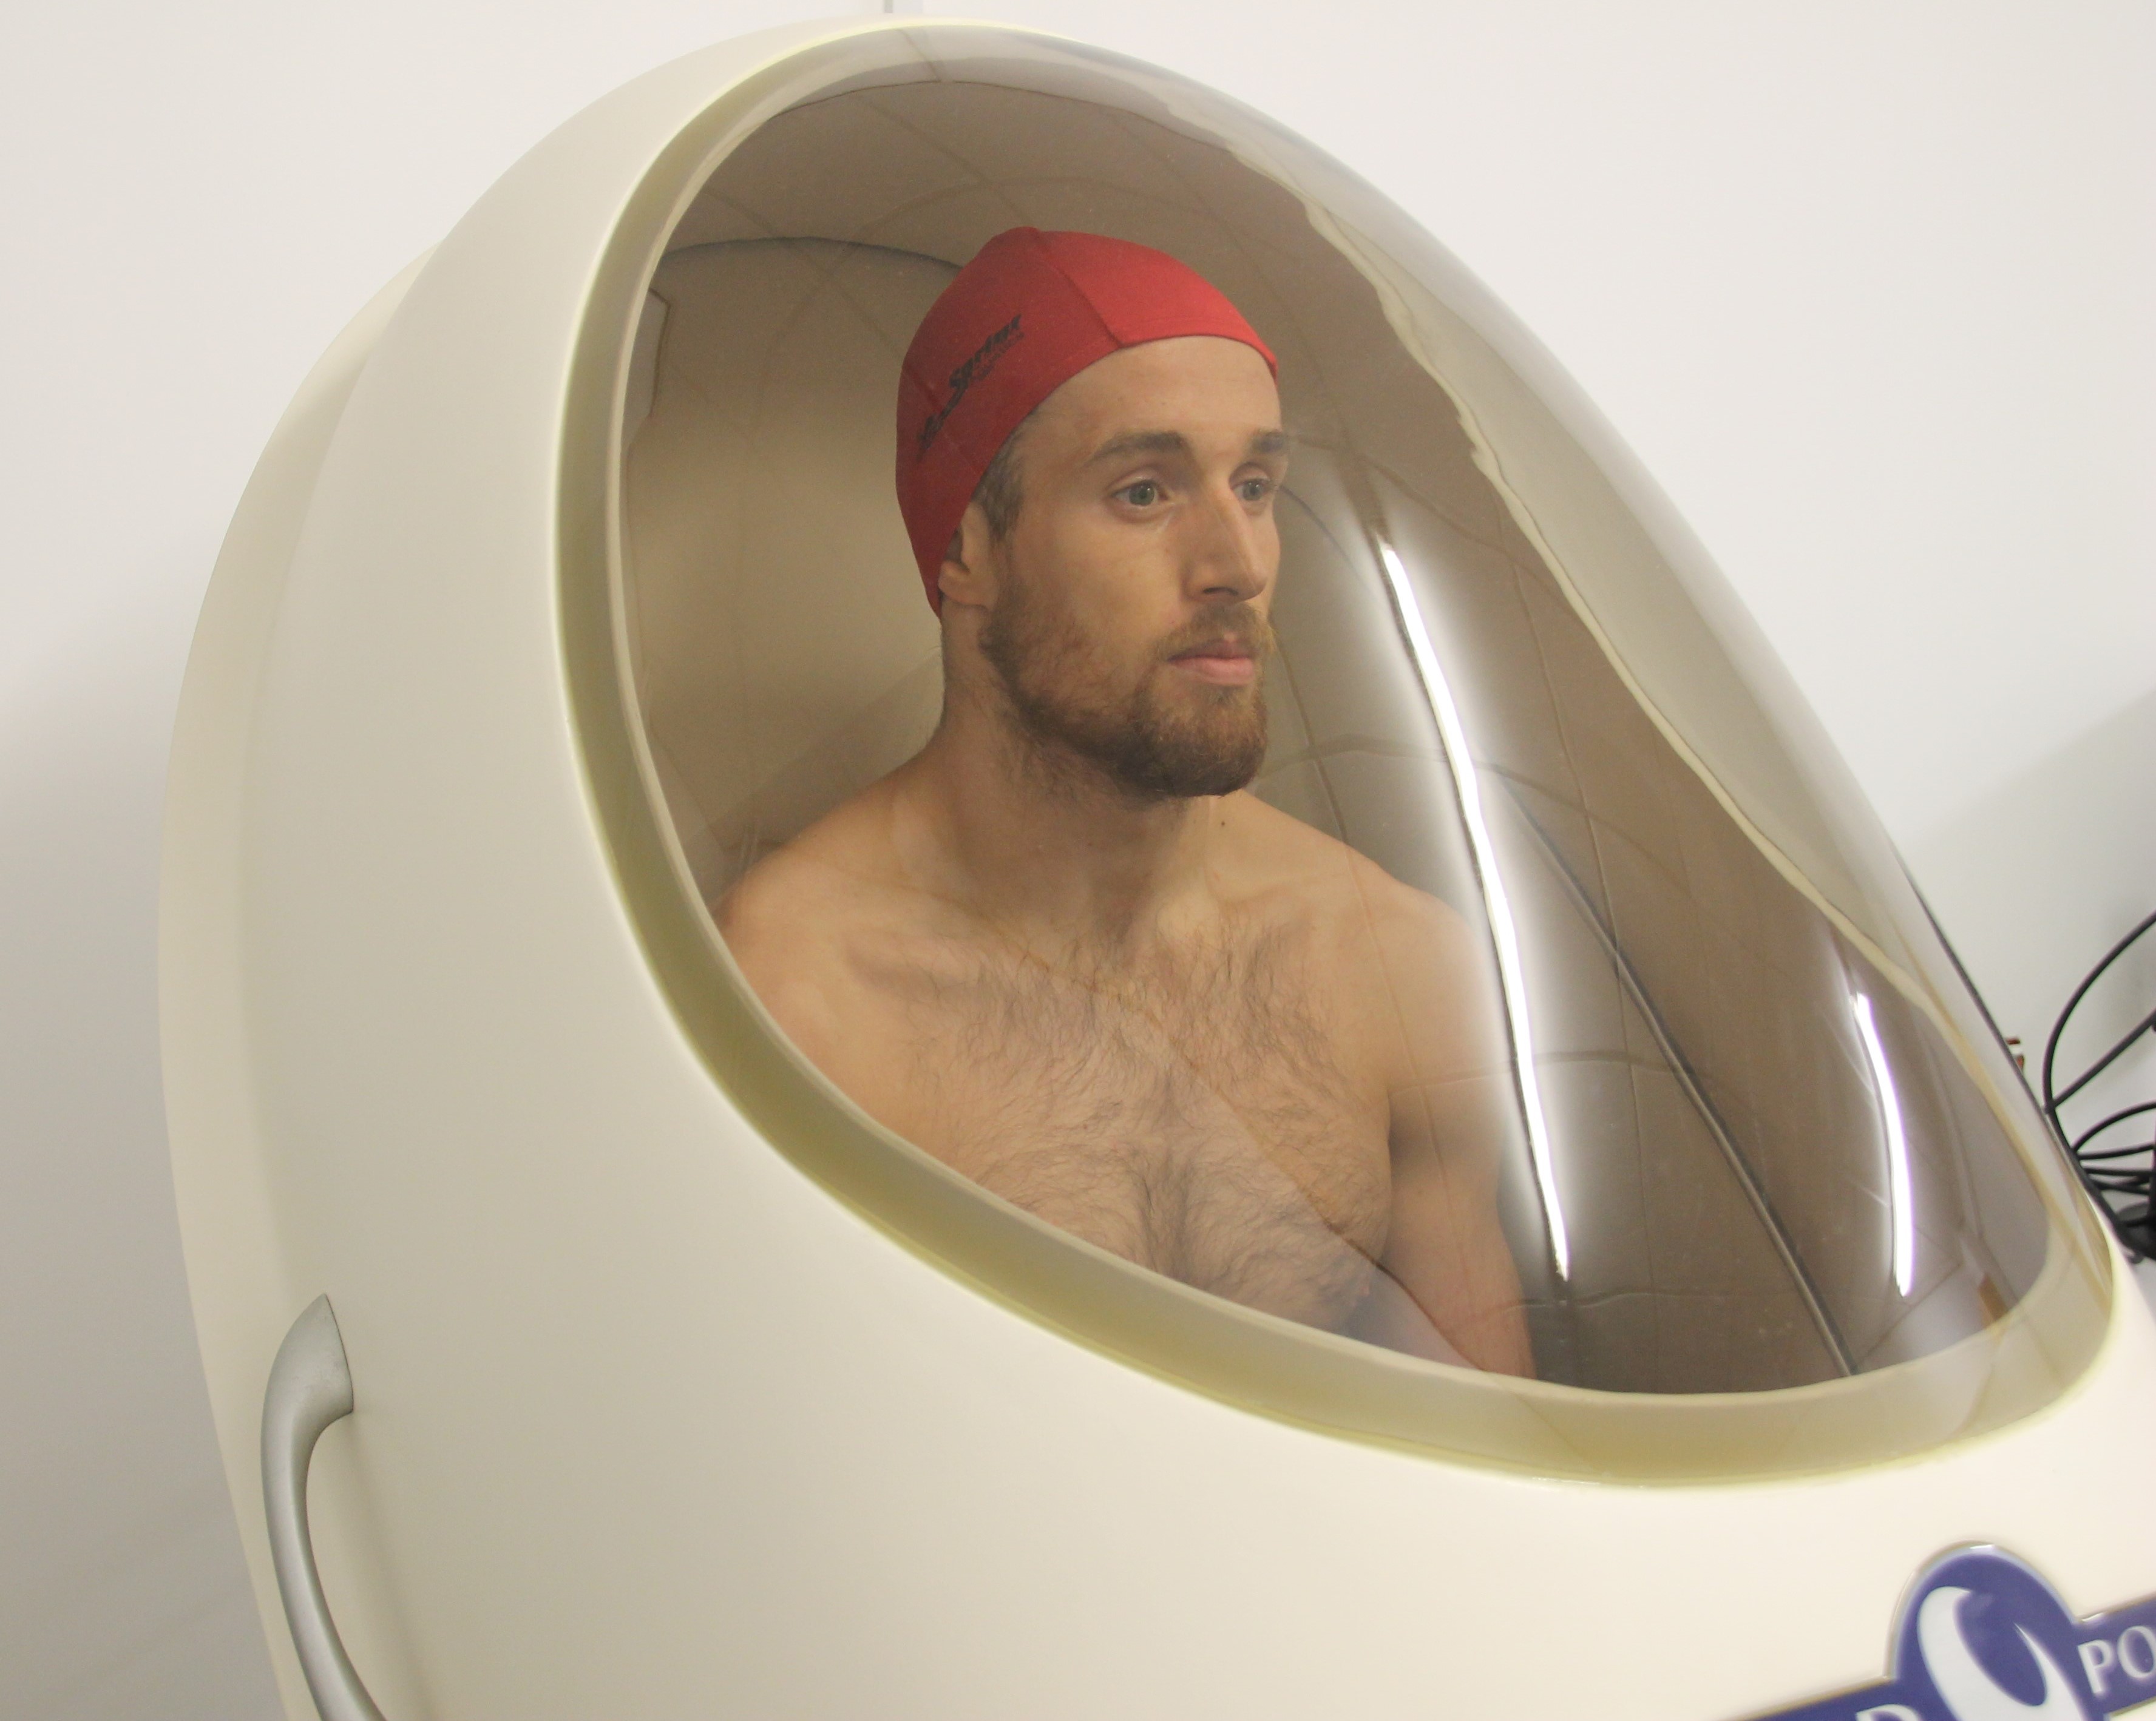 Bodpod with client in